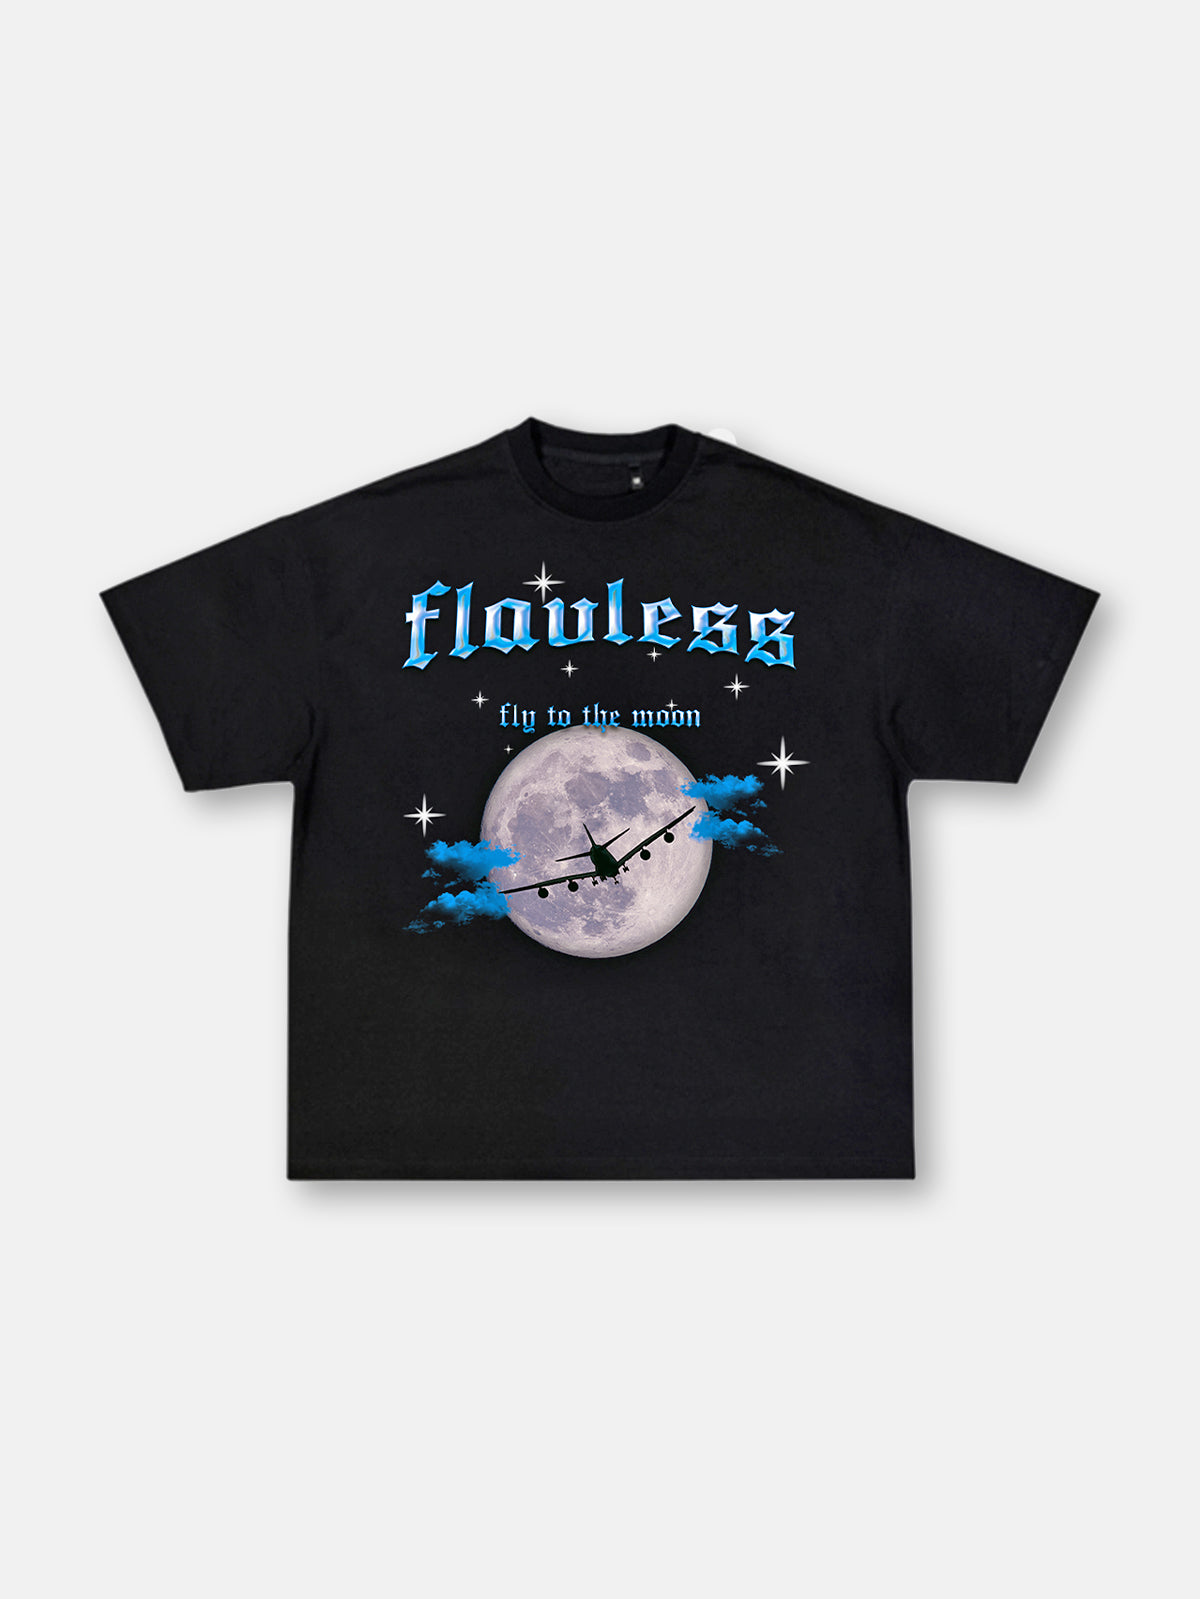 FLY TO THE MOON T-SHIRT - SKY BLUE